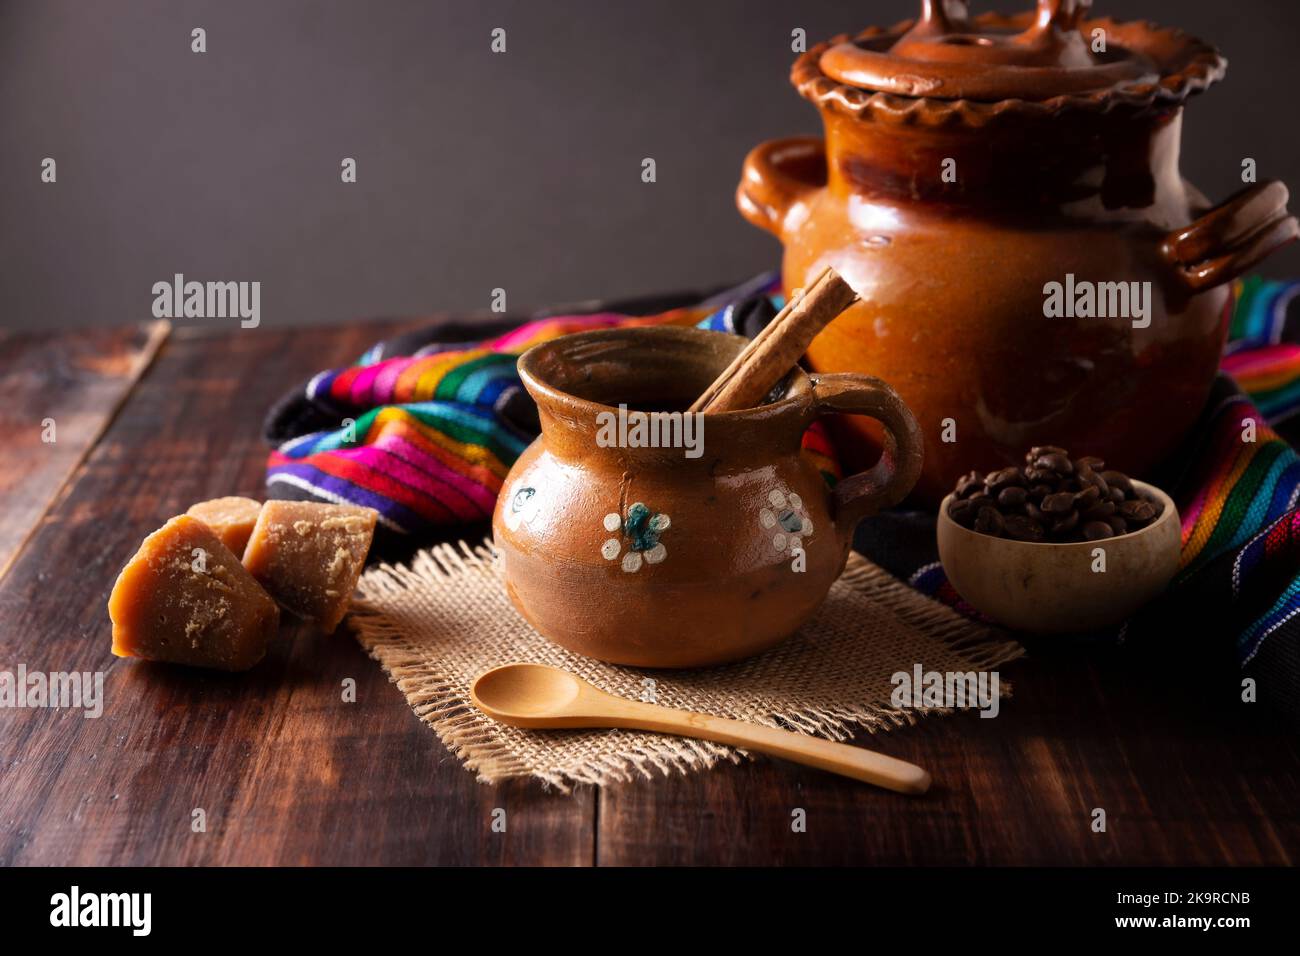 Authentic homemade mexican coffee (cafe de olla) served in traditional handmade clay mug (Jarrito de barro) on rustic wooden table. Stock Photo